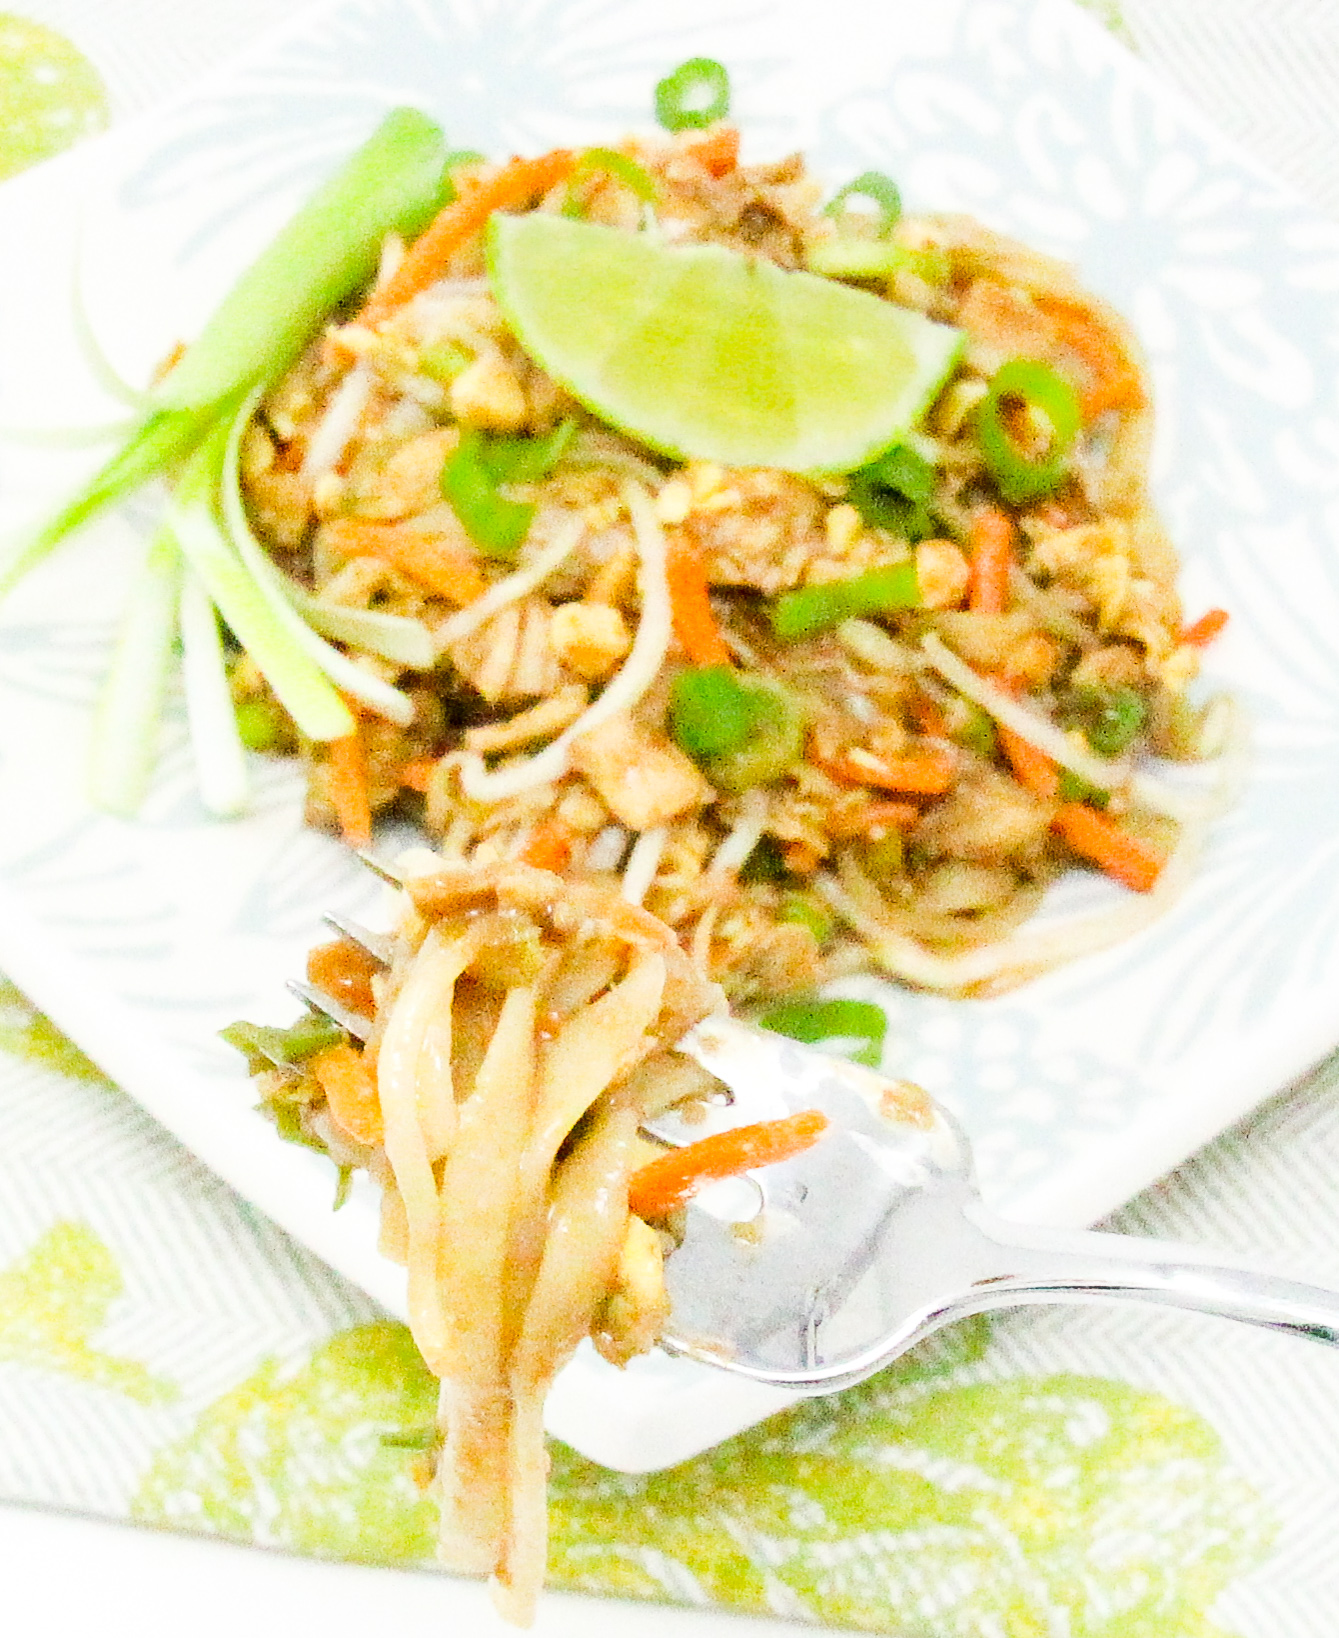 Chicken Pad Thai combines a spicy sweet sauce with rice noodles (making this dish naturally gluten-free), while the crunch of the veggies and roasted peanuts add a pleasing texture. Recipe shared with permission granted by Maddie Day, author of MURDER AT THE RUSTY ANCHOR. 